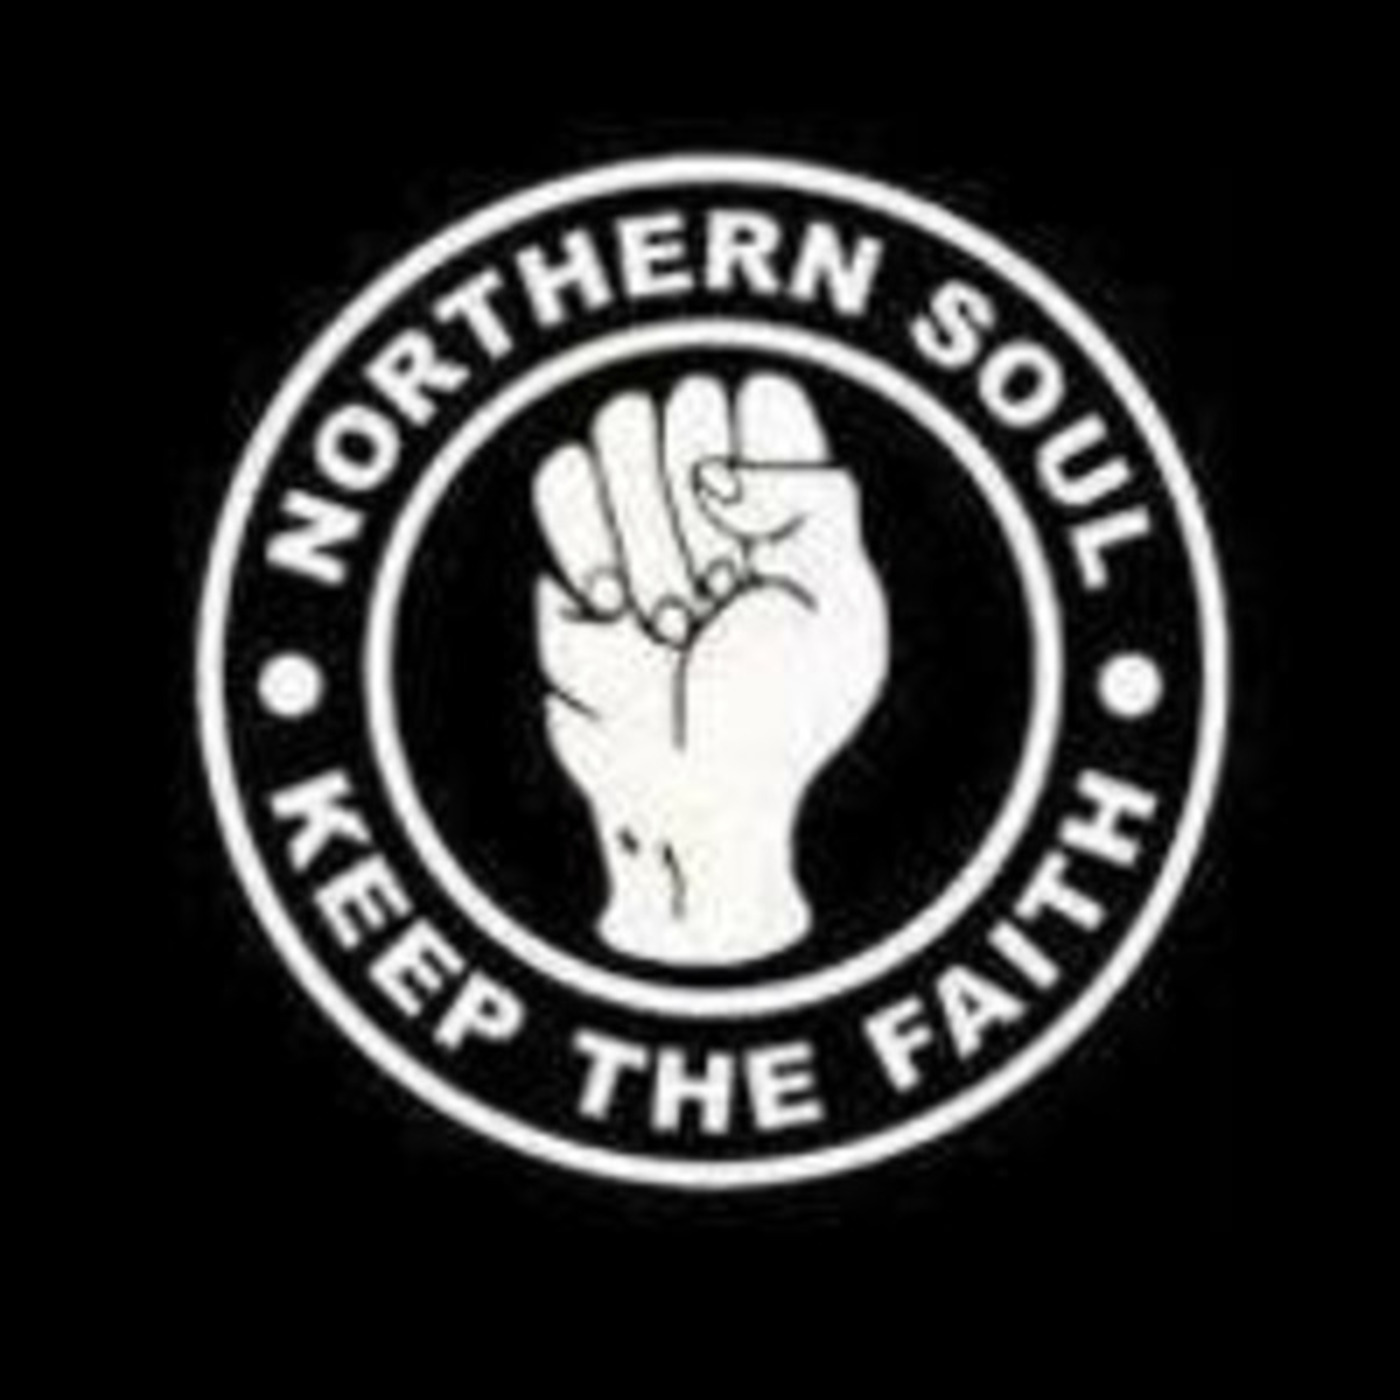 Northern soul hour /march